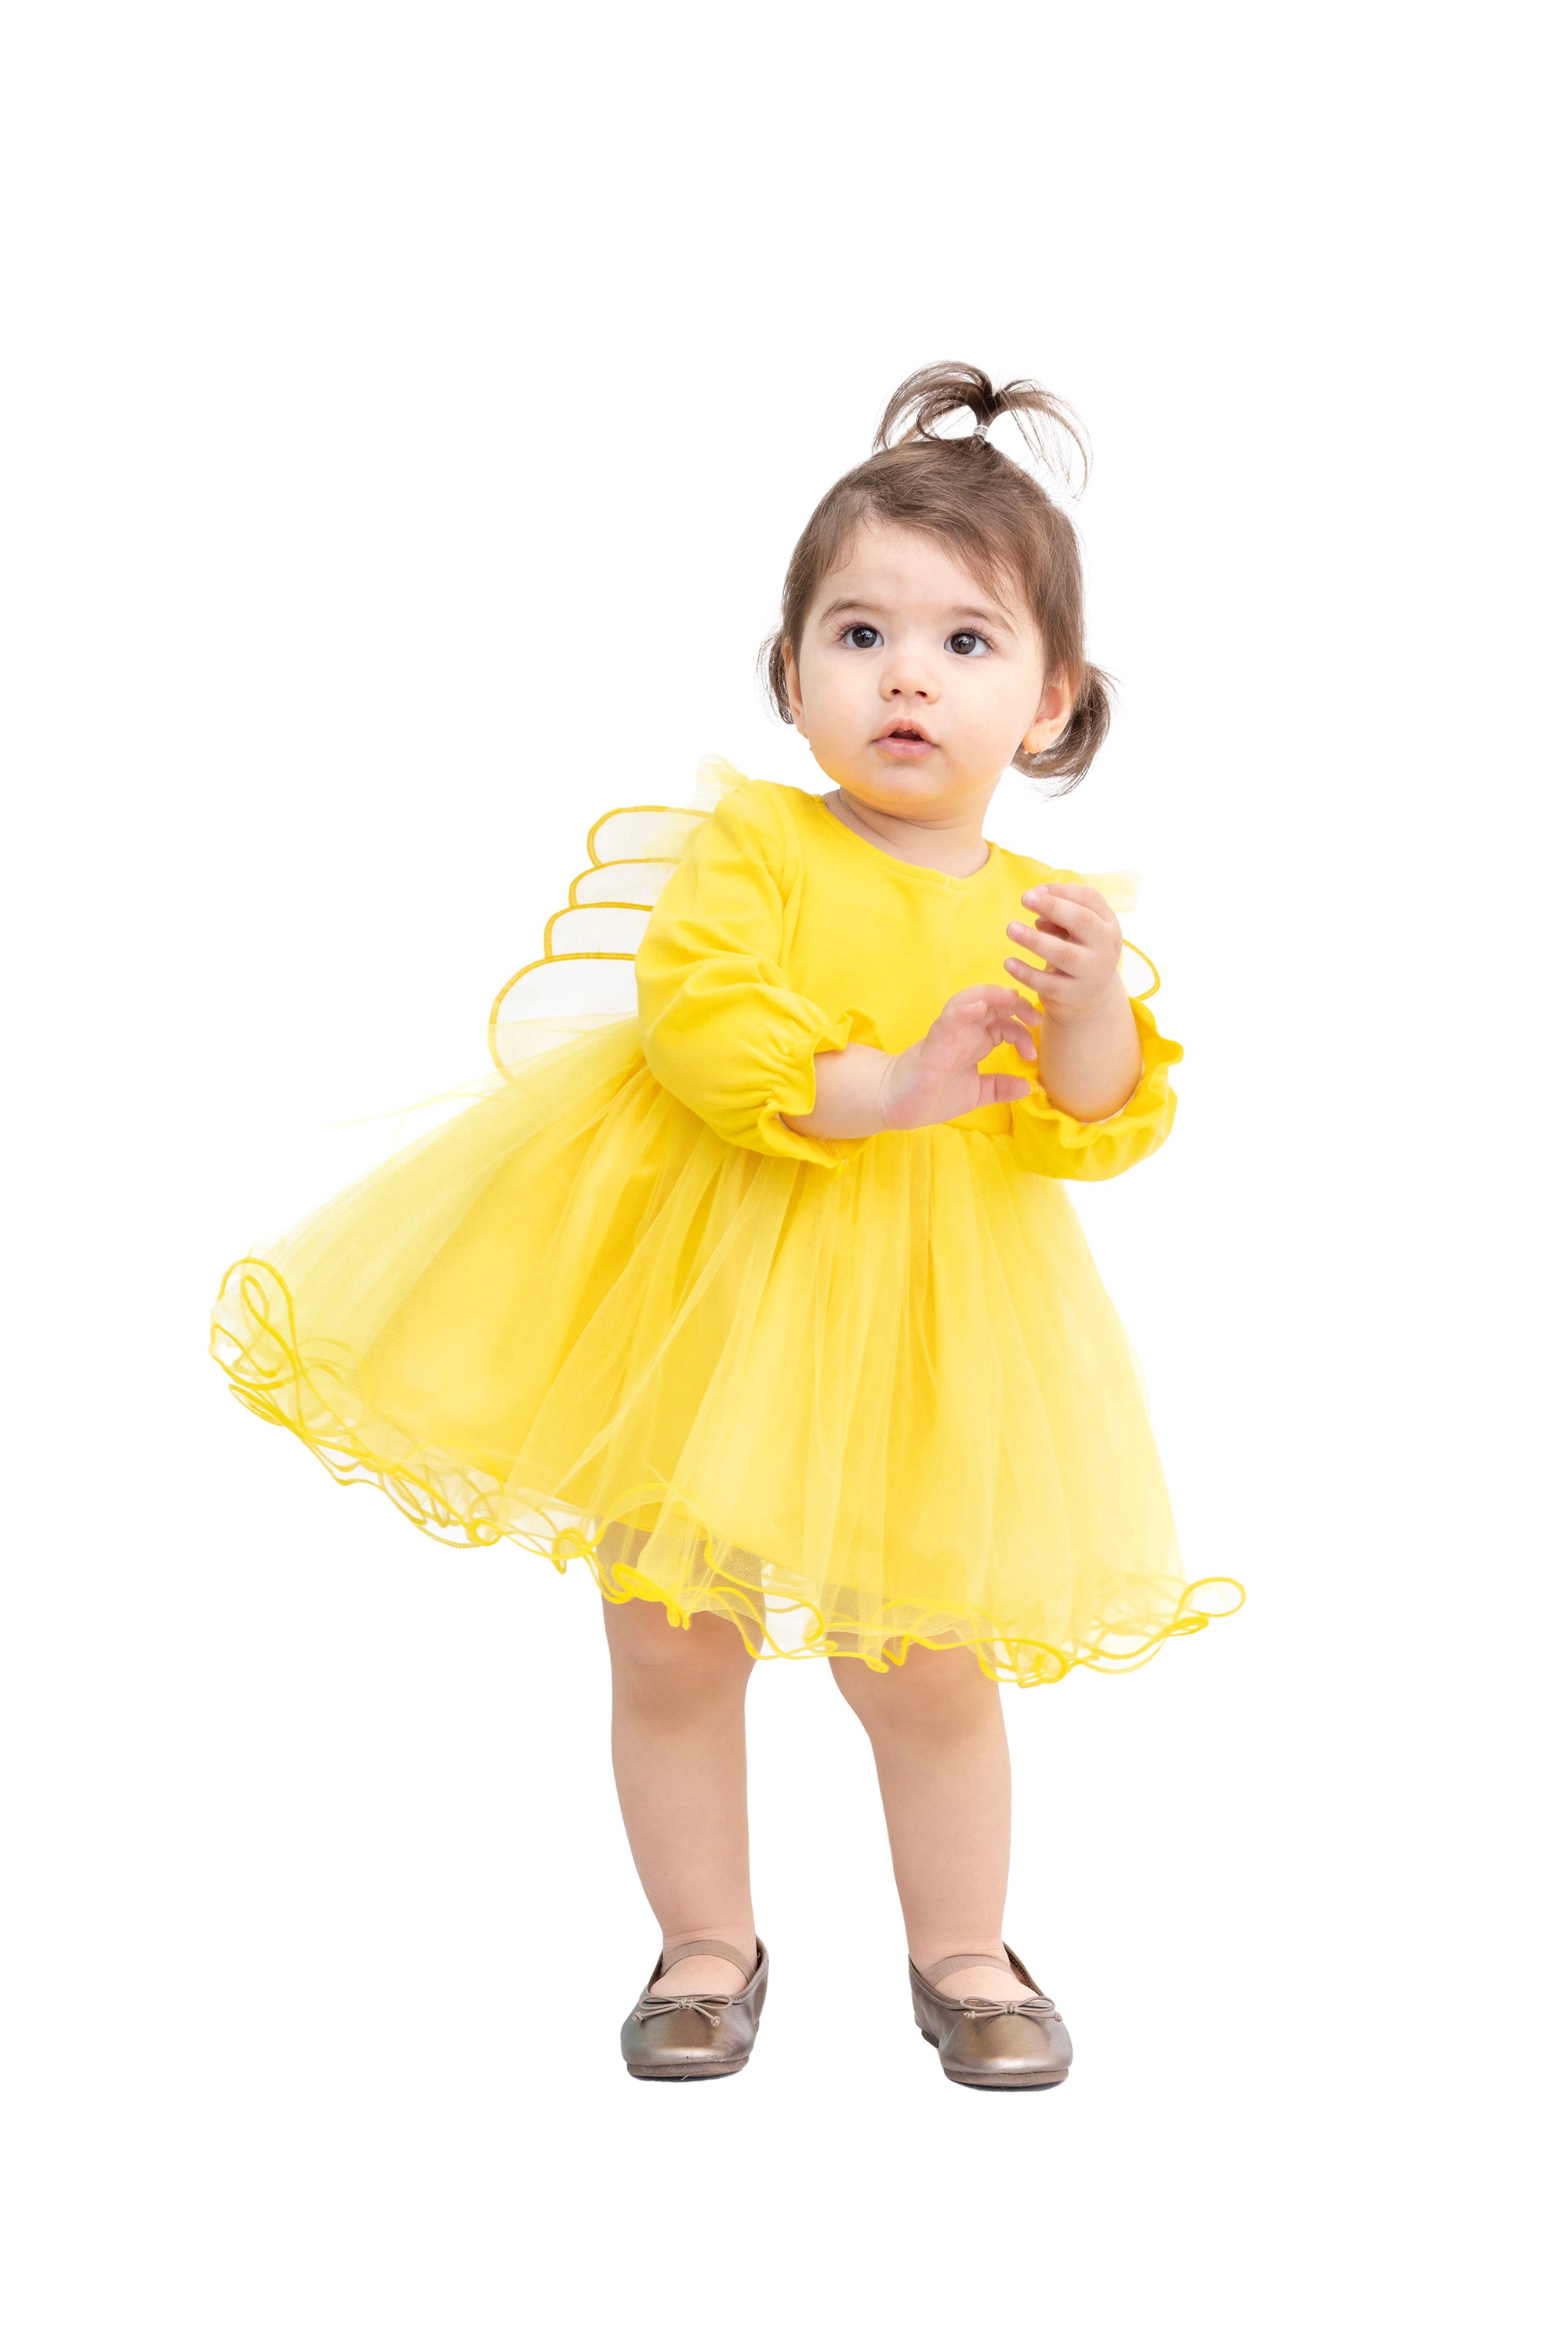 xiaxaixu Baby Kids Girl's Slip Dress, Tie-up Butterfly Summer A-line Tulle  Dress for Party Daily 